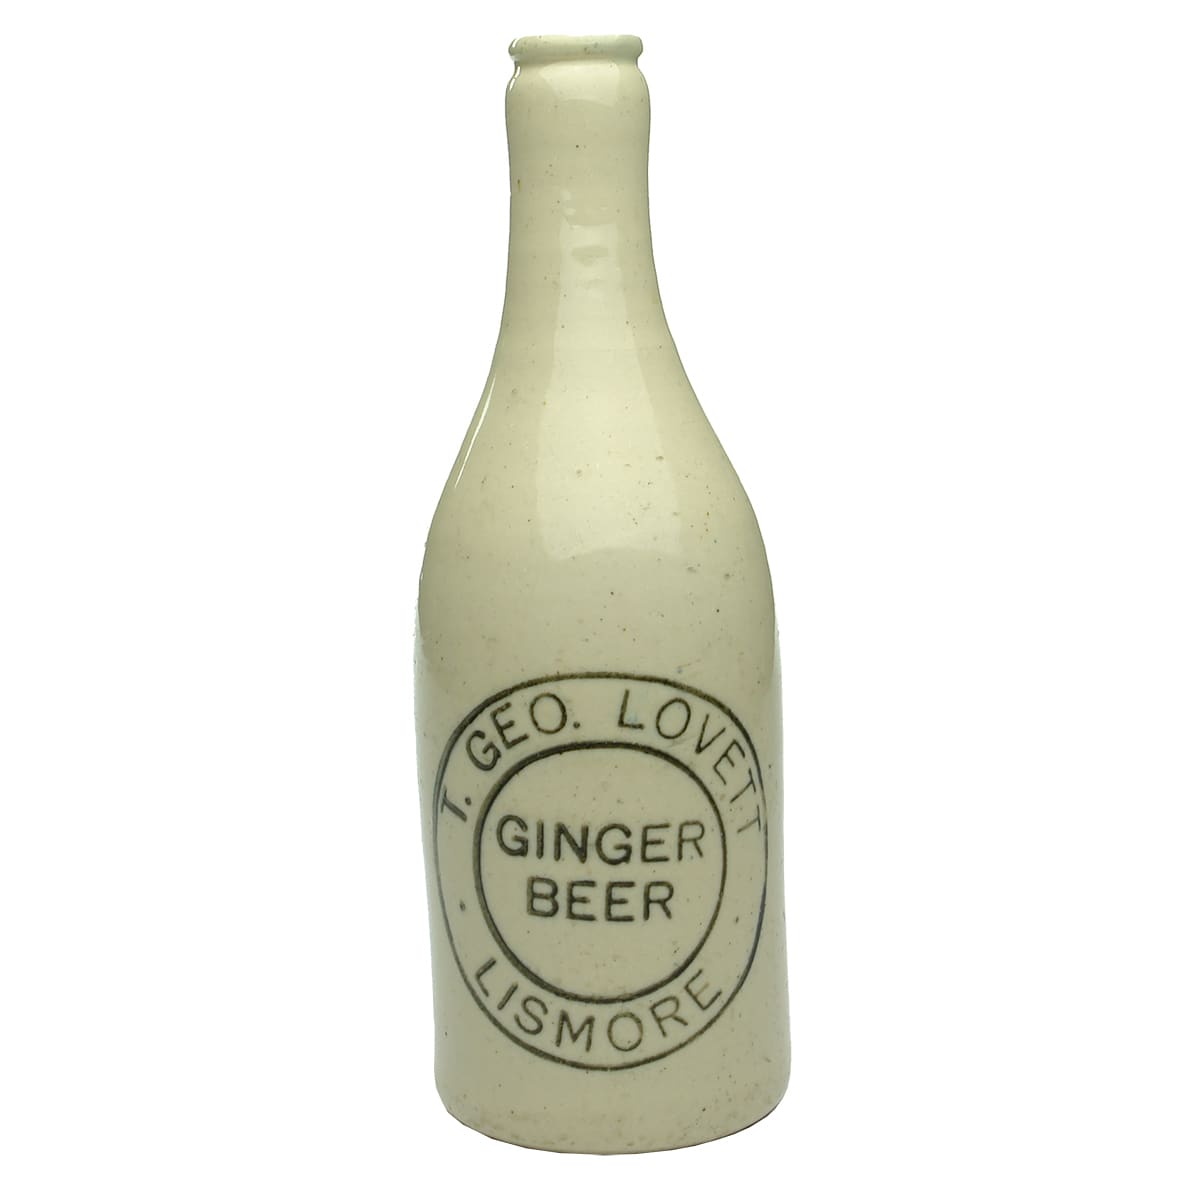 Ginger Beer. T. Geo. Lovett, Lismore. Champagne. All White. (New South Wales)